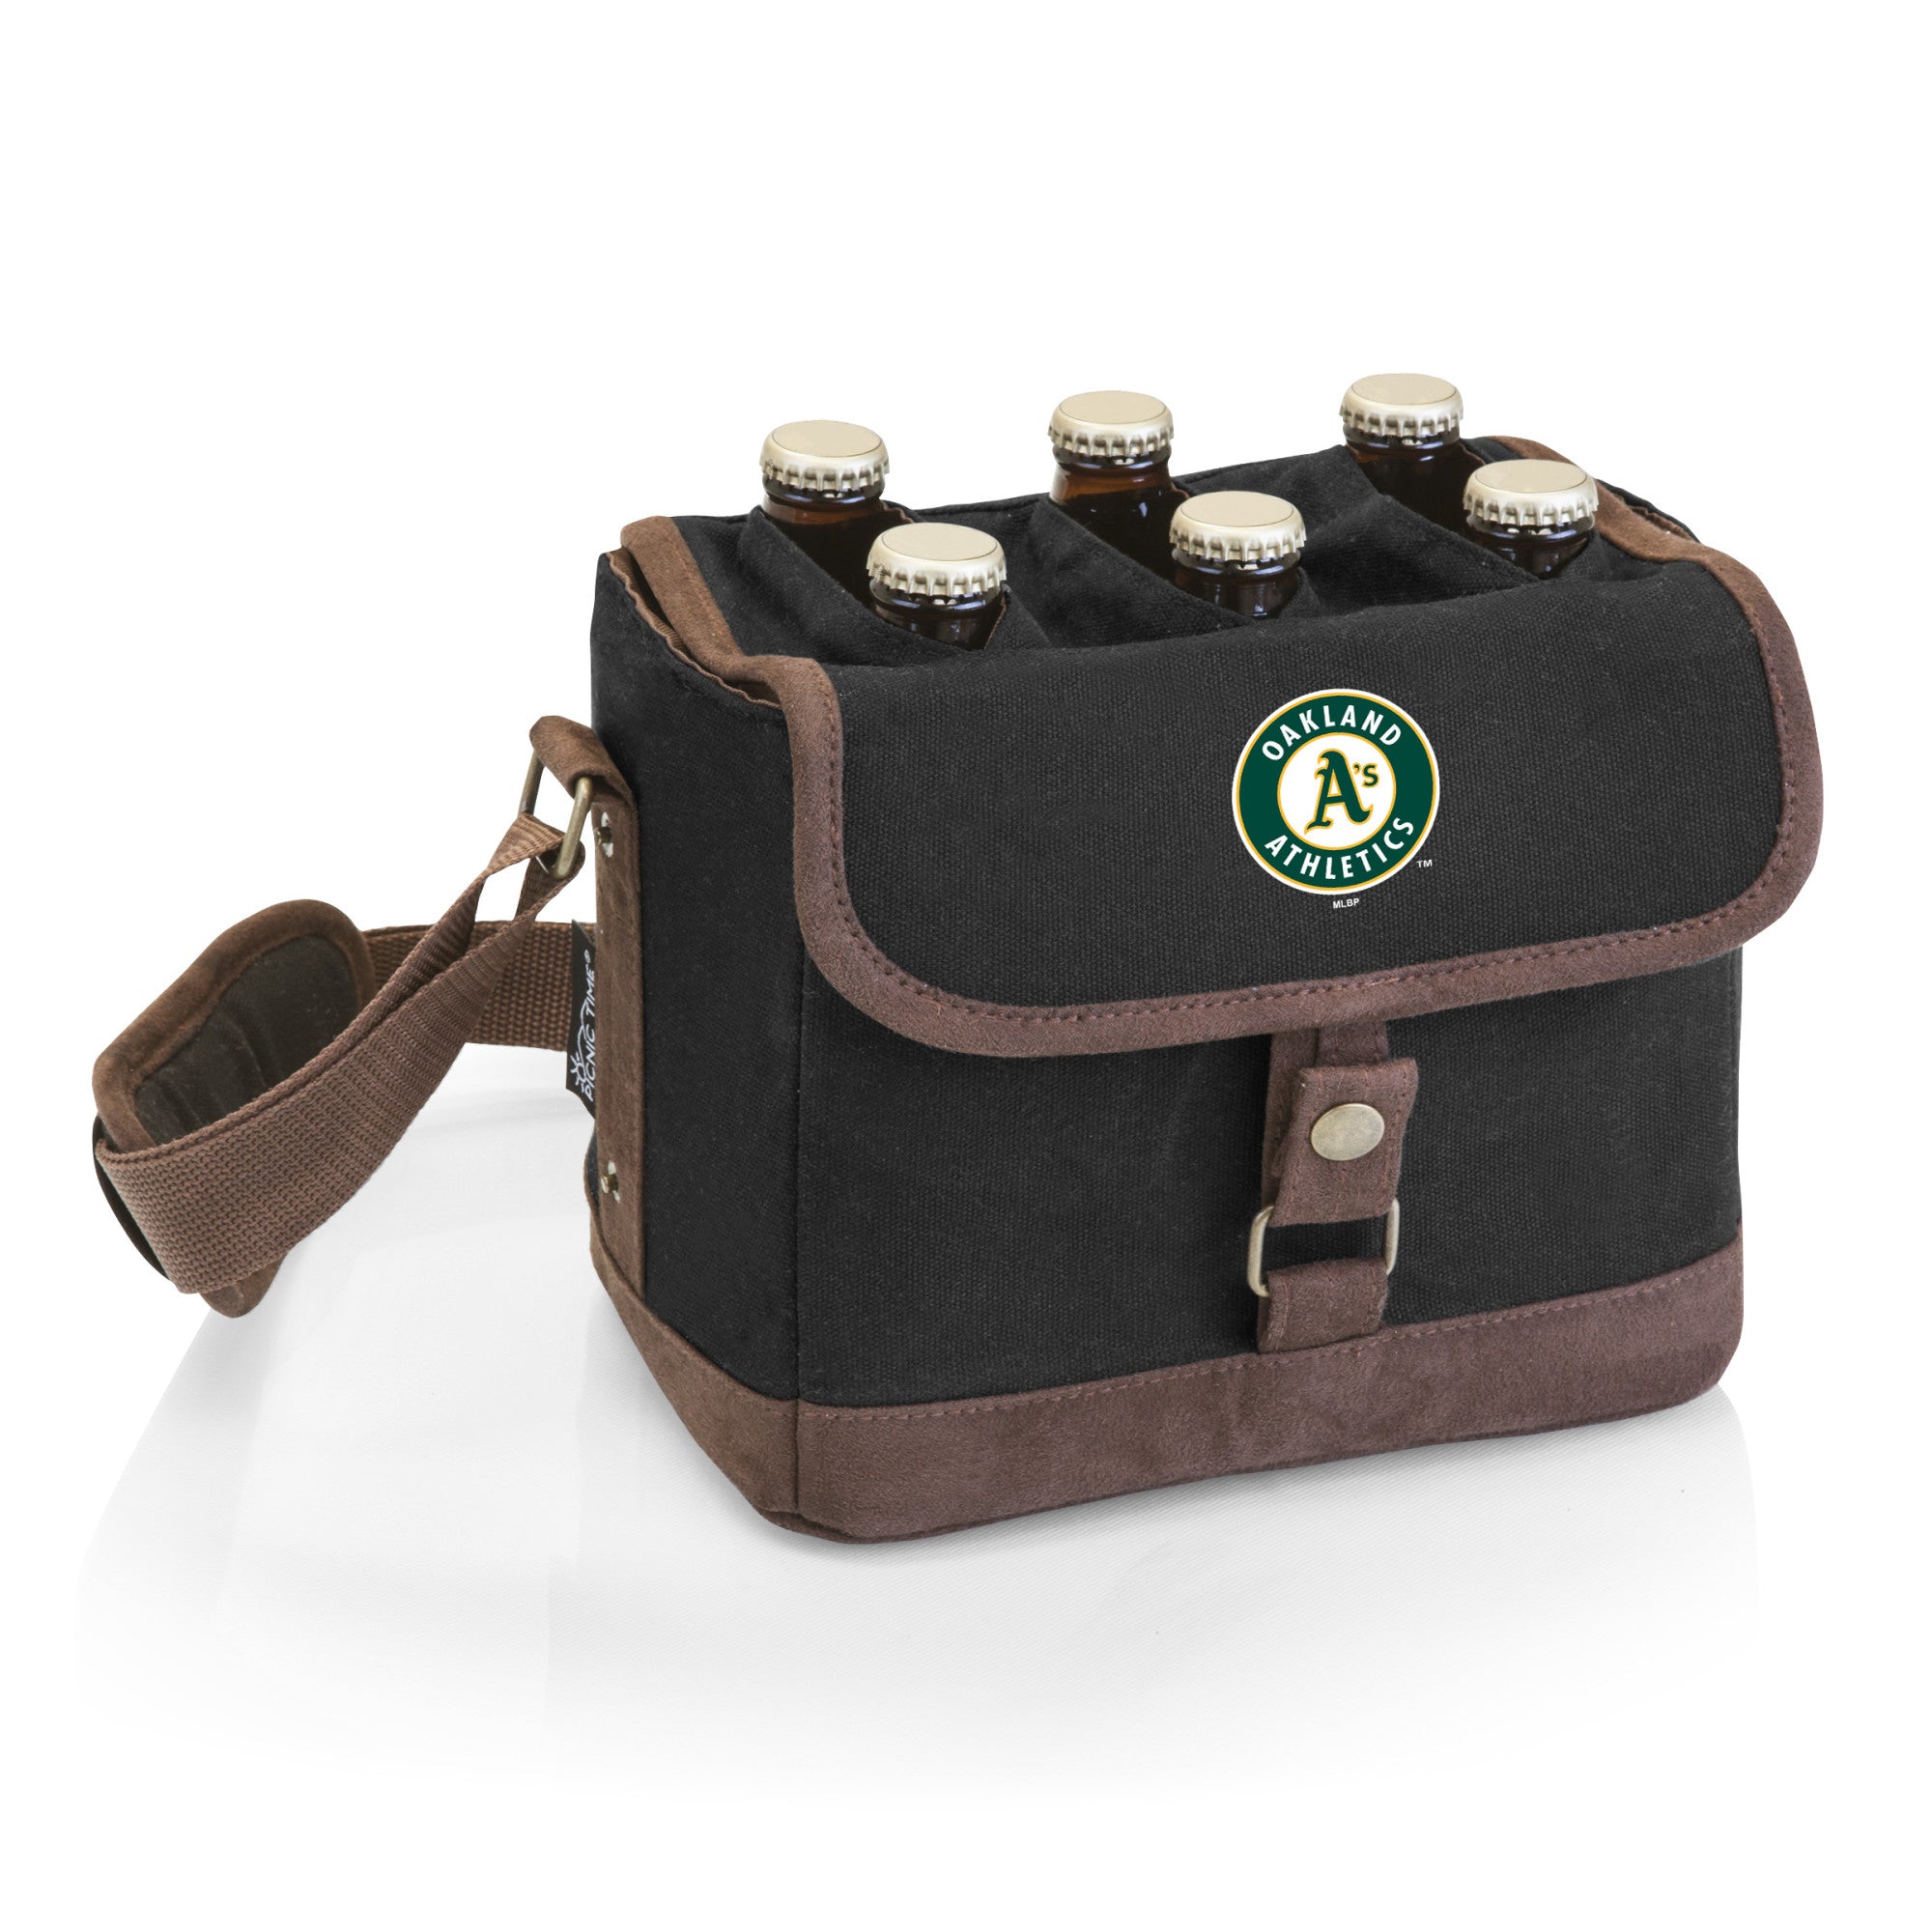 Oakland Athletics - Beer Caddy Cooler Tote with Opener